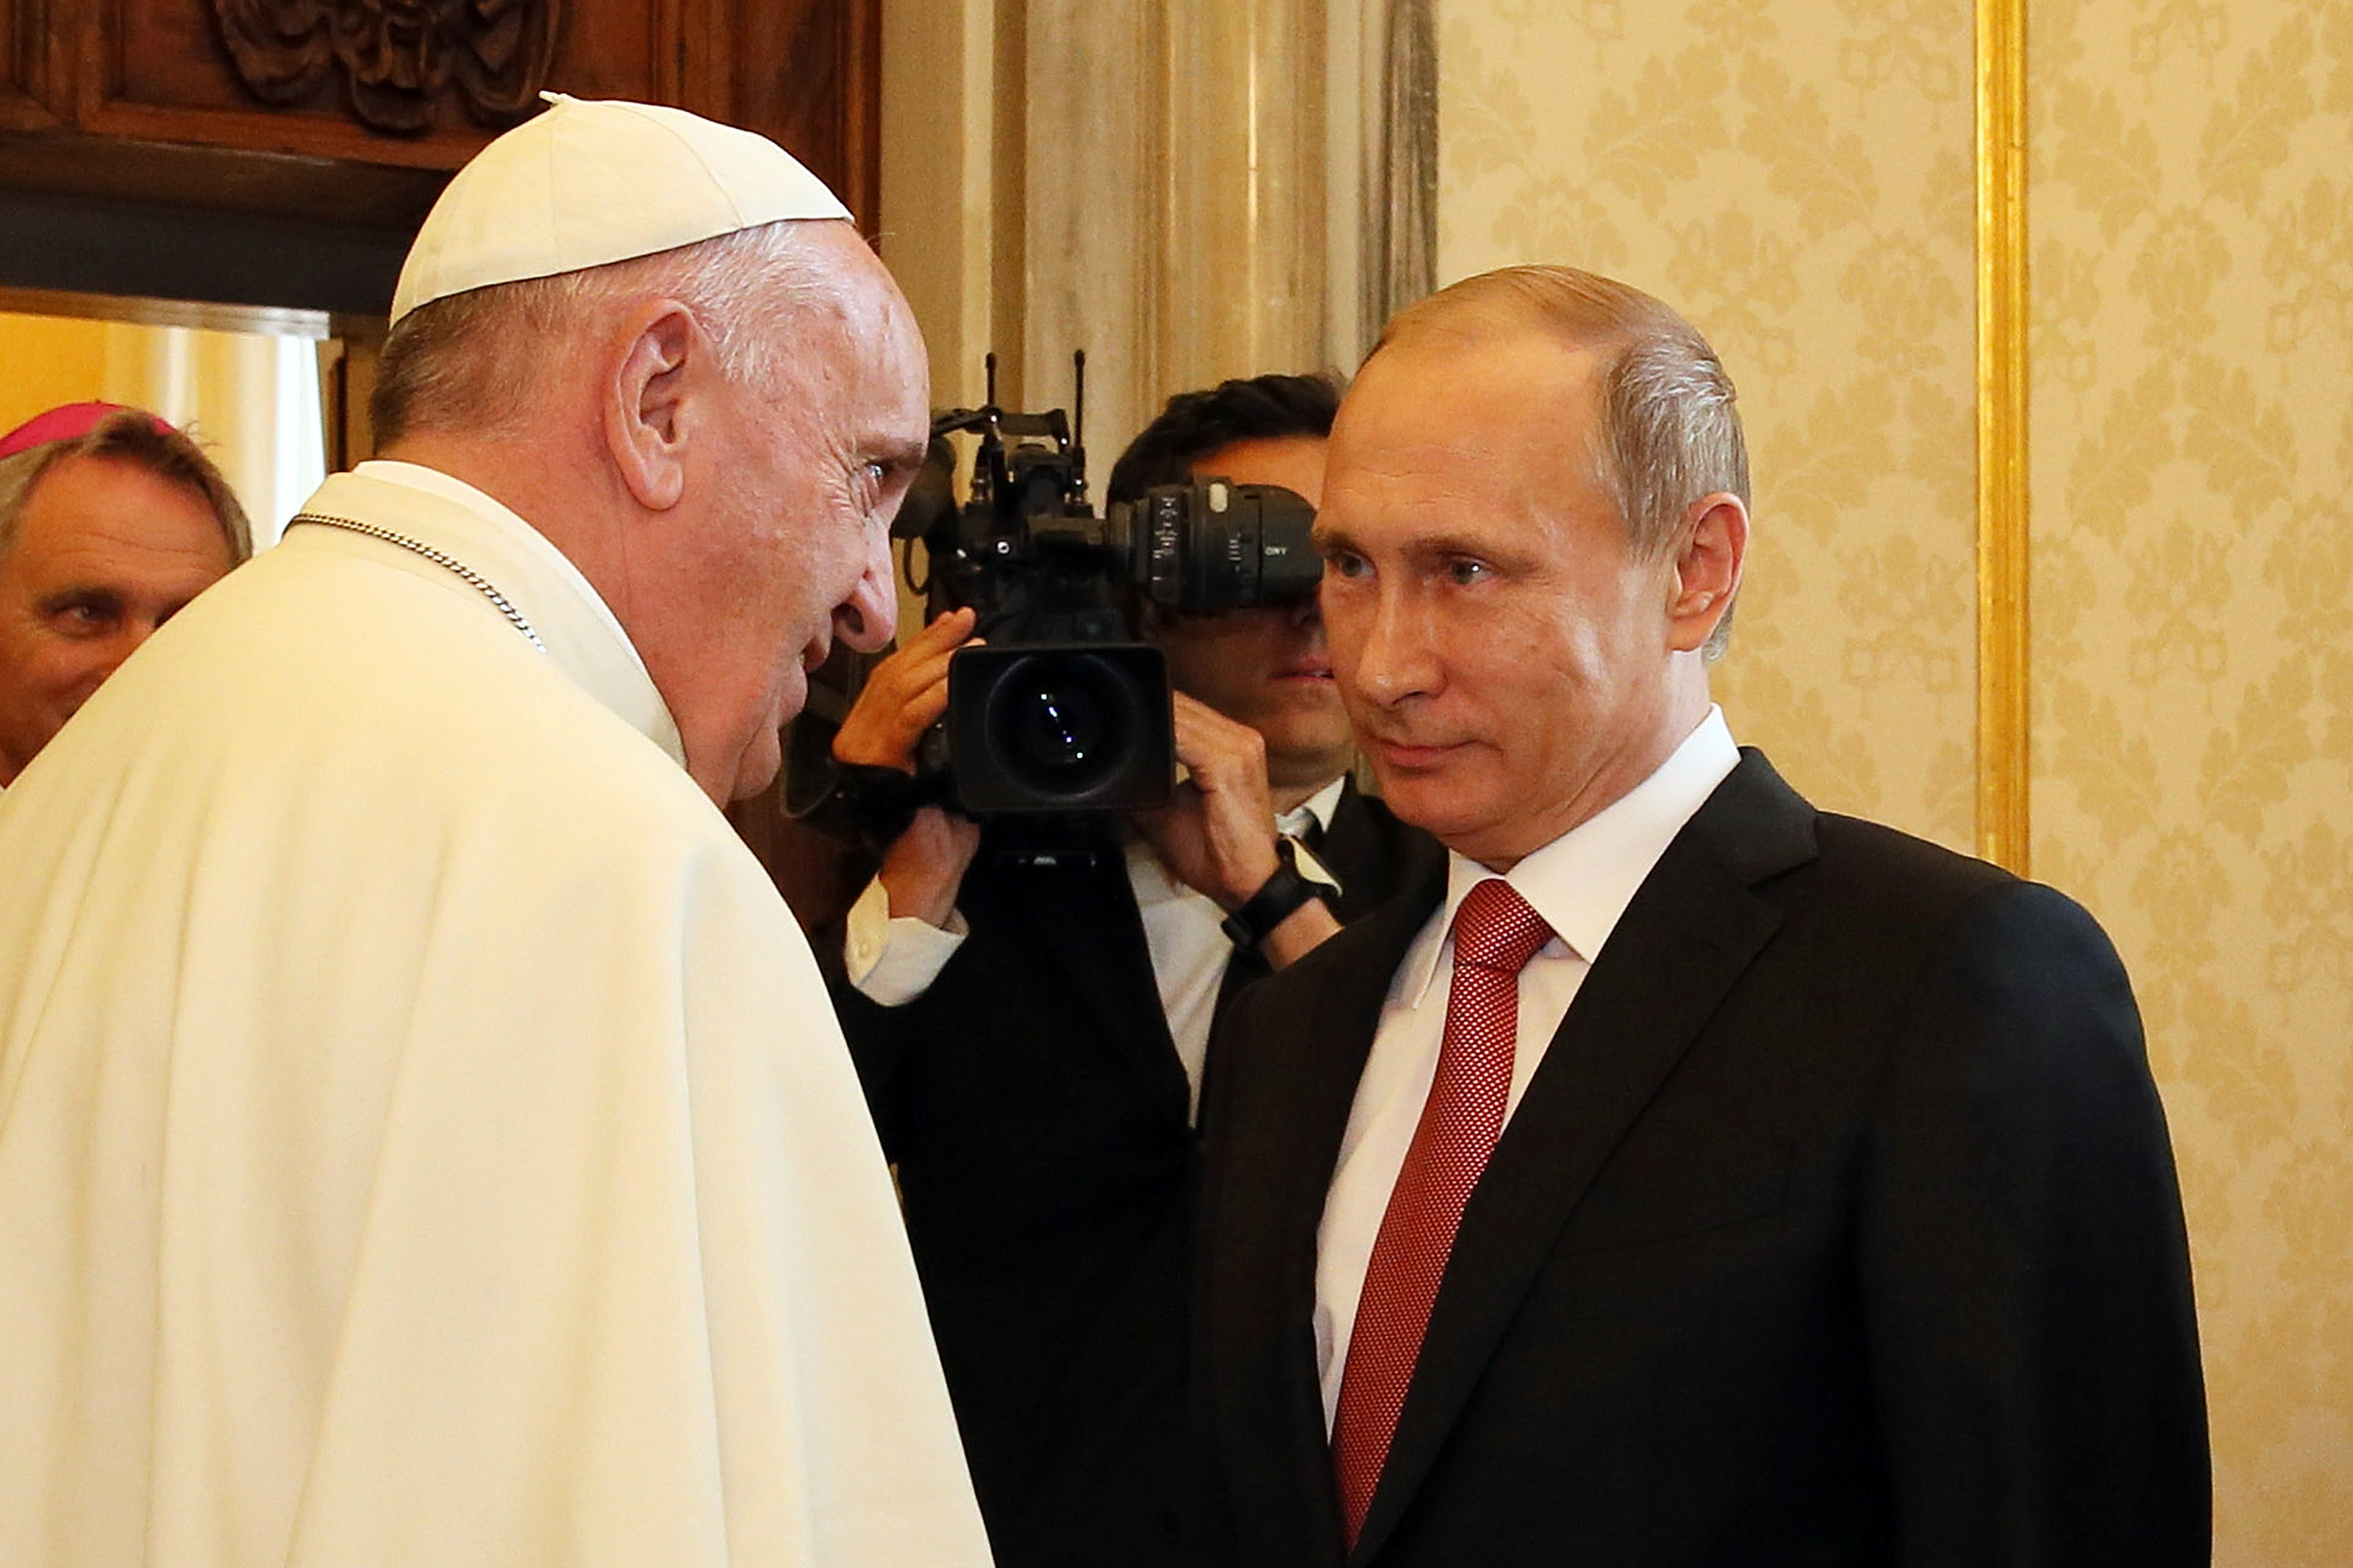 Pope Francis meets President of Russian Federation Vladimir Putin during an audience at the Apostolic Palace on June 10, 2015 in Vatican City, Vatican.